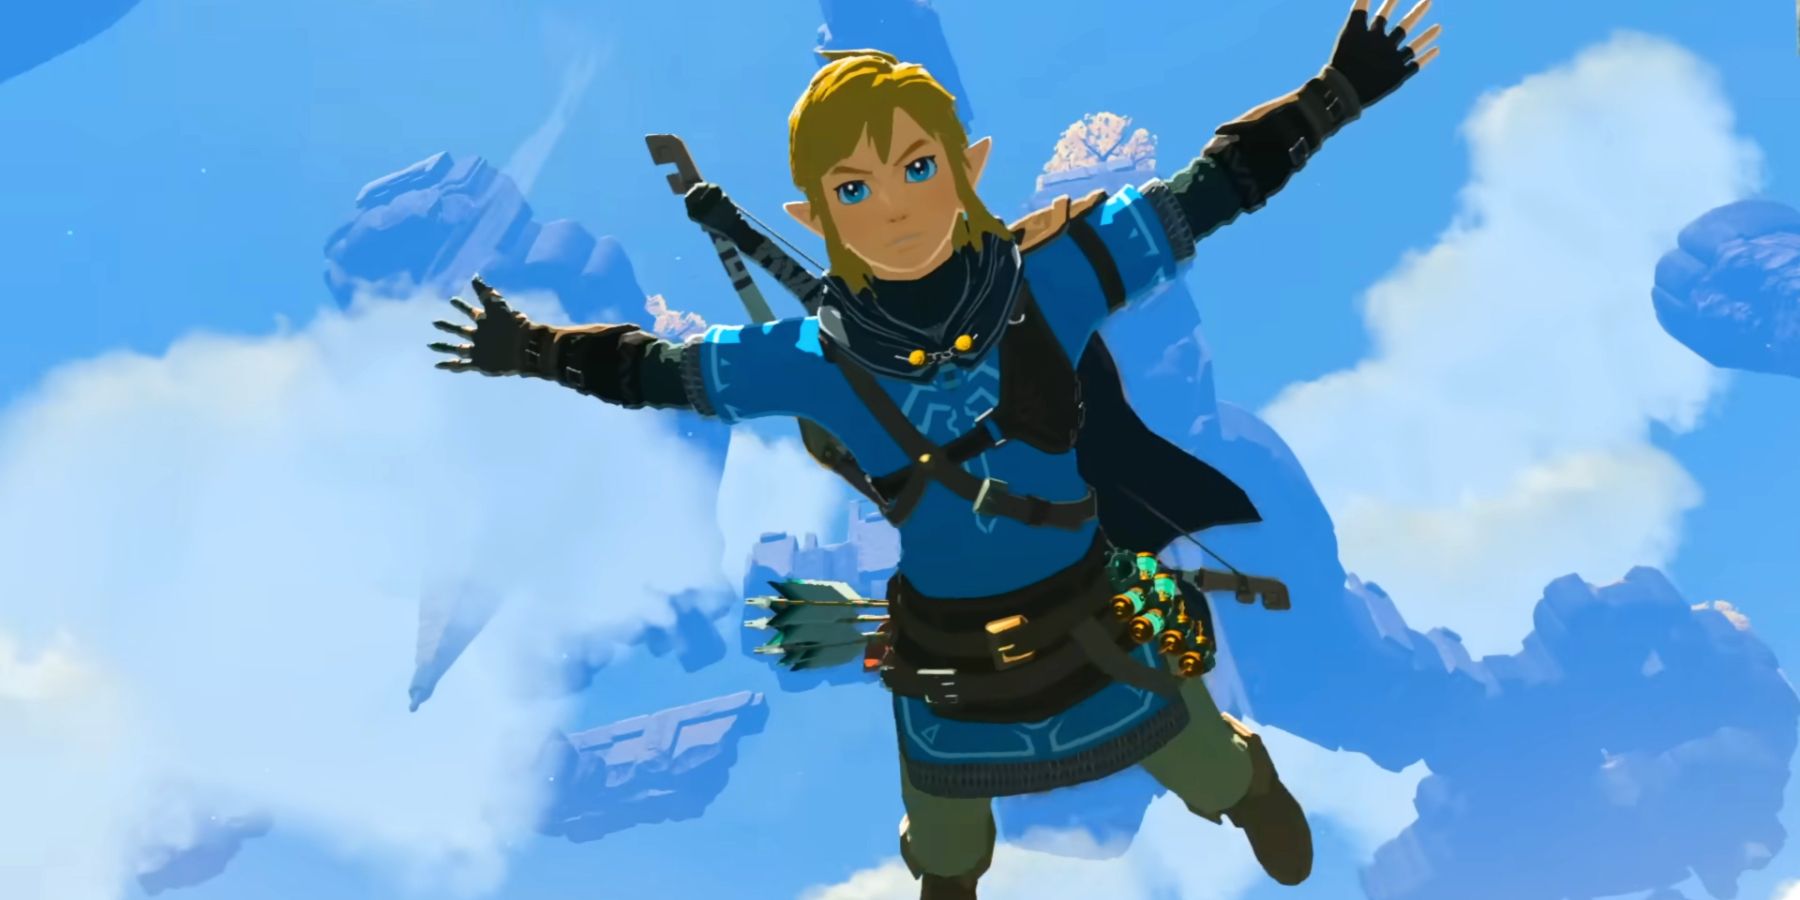 Link skydiving from a floating island in a Tears of the Kingdom trailer. His arms and legs are outspread, with the camera below Link, looking up at him with clouds and more floating islands in the sky behind.